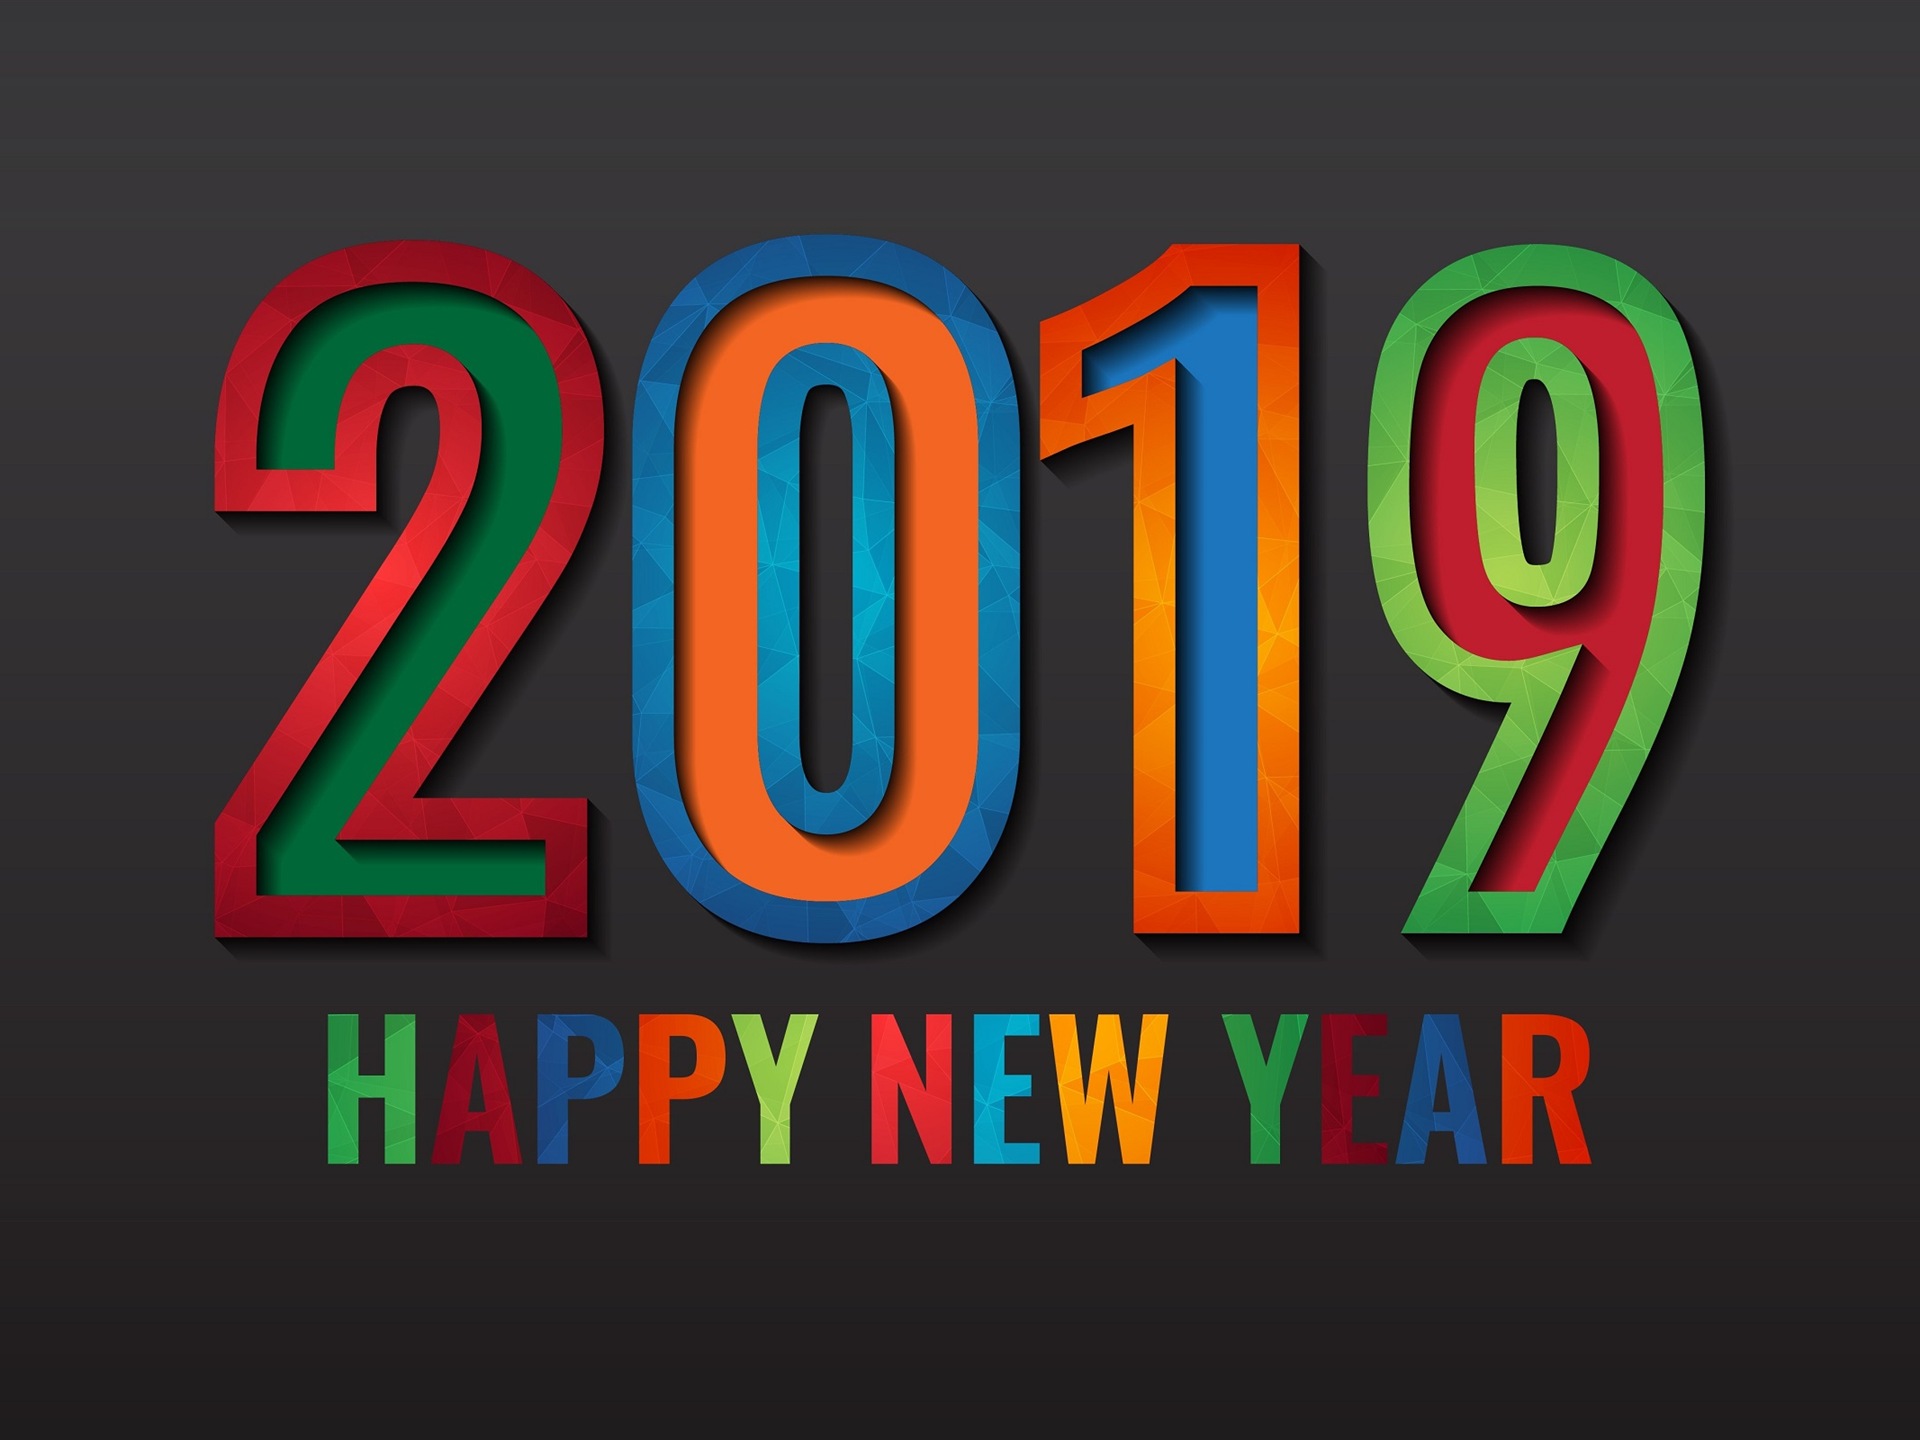 Happy New Year 2019 HD wallpapers #6 - 1920x1440